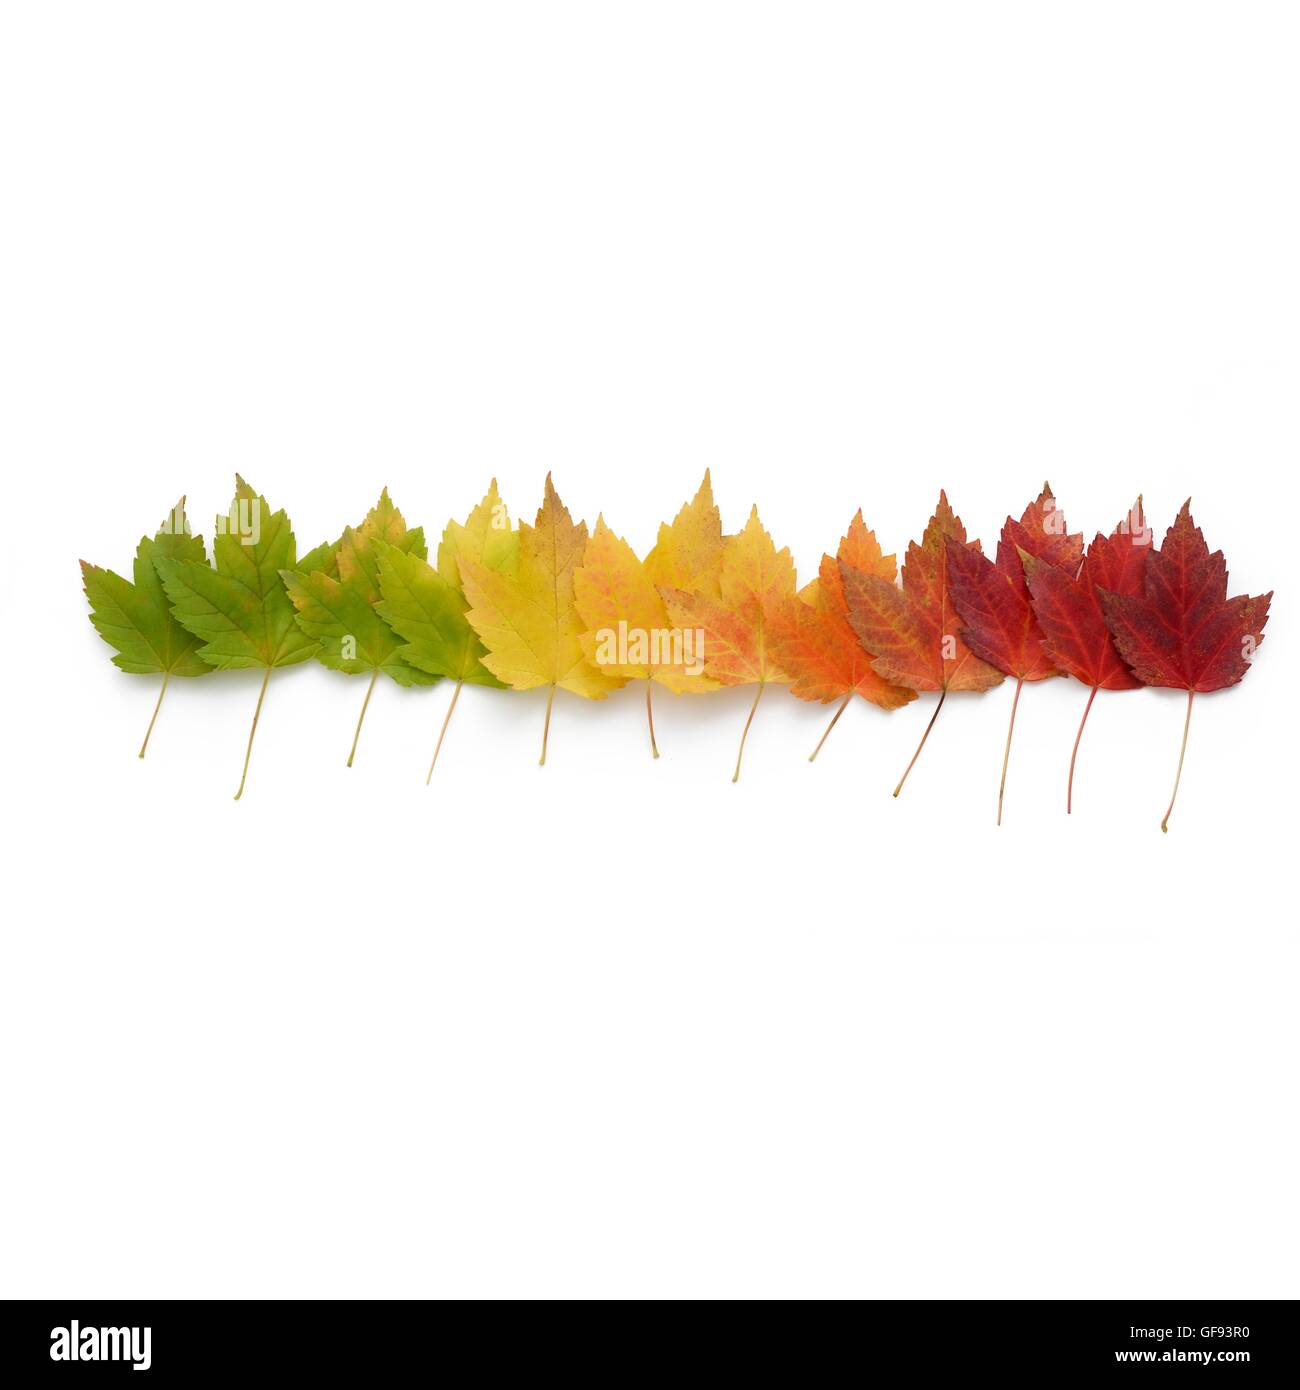 Autumn leaves in a row, studio shot. Stock Photo